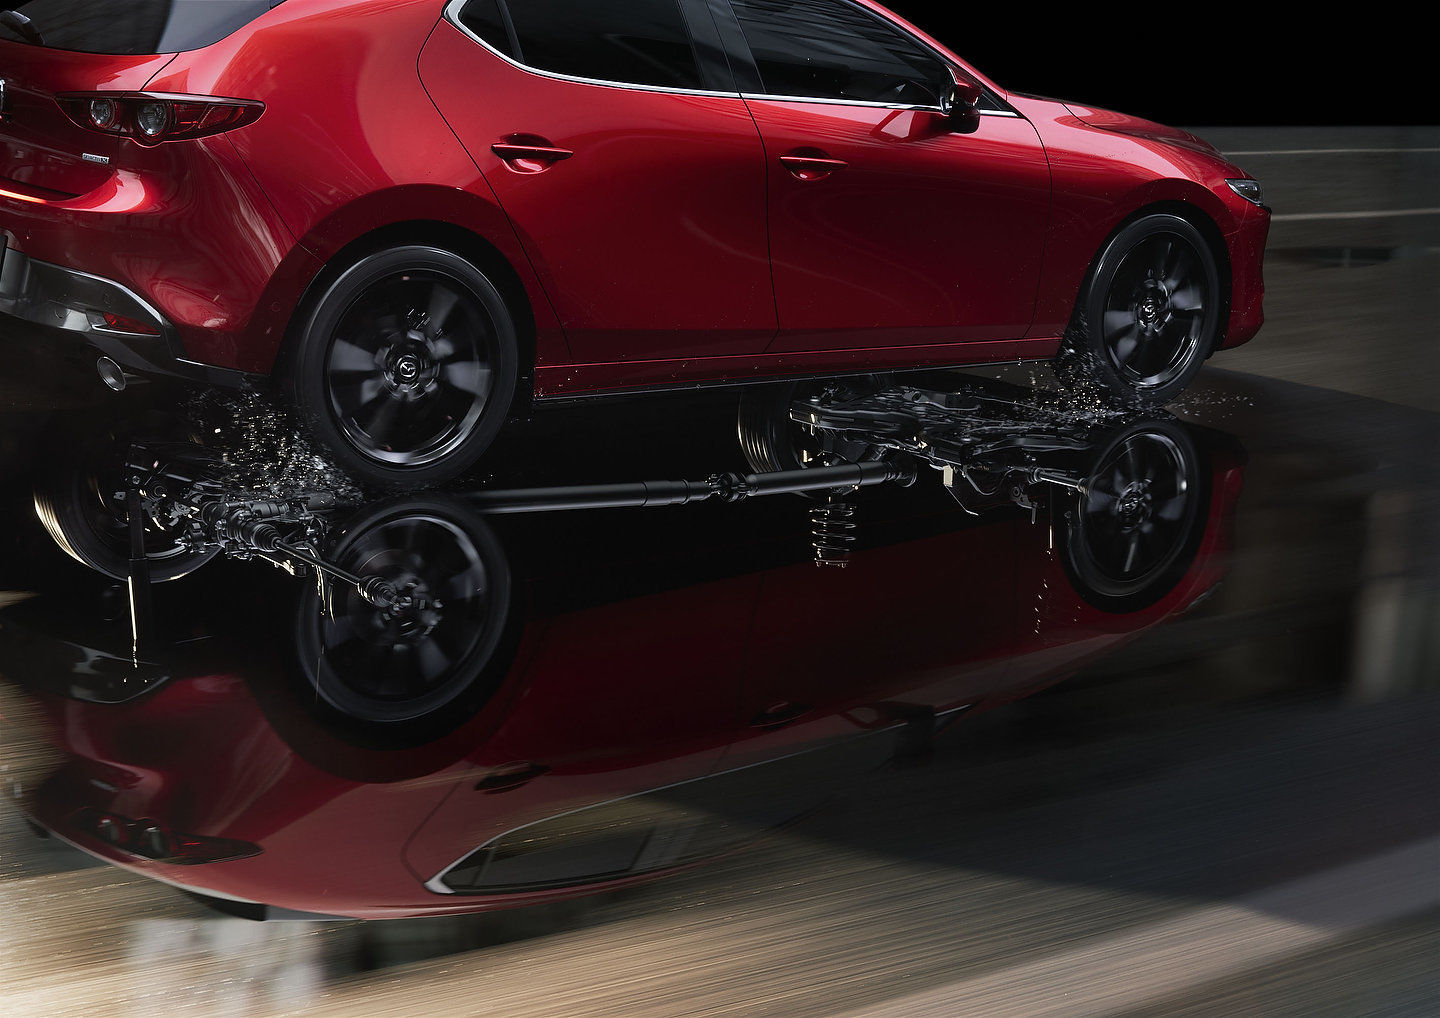 All About Mazda's i-ACTIV AWD System